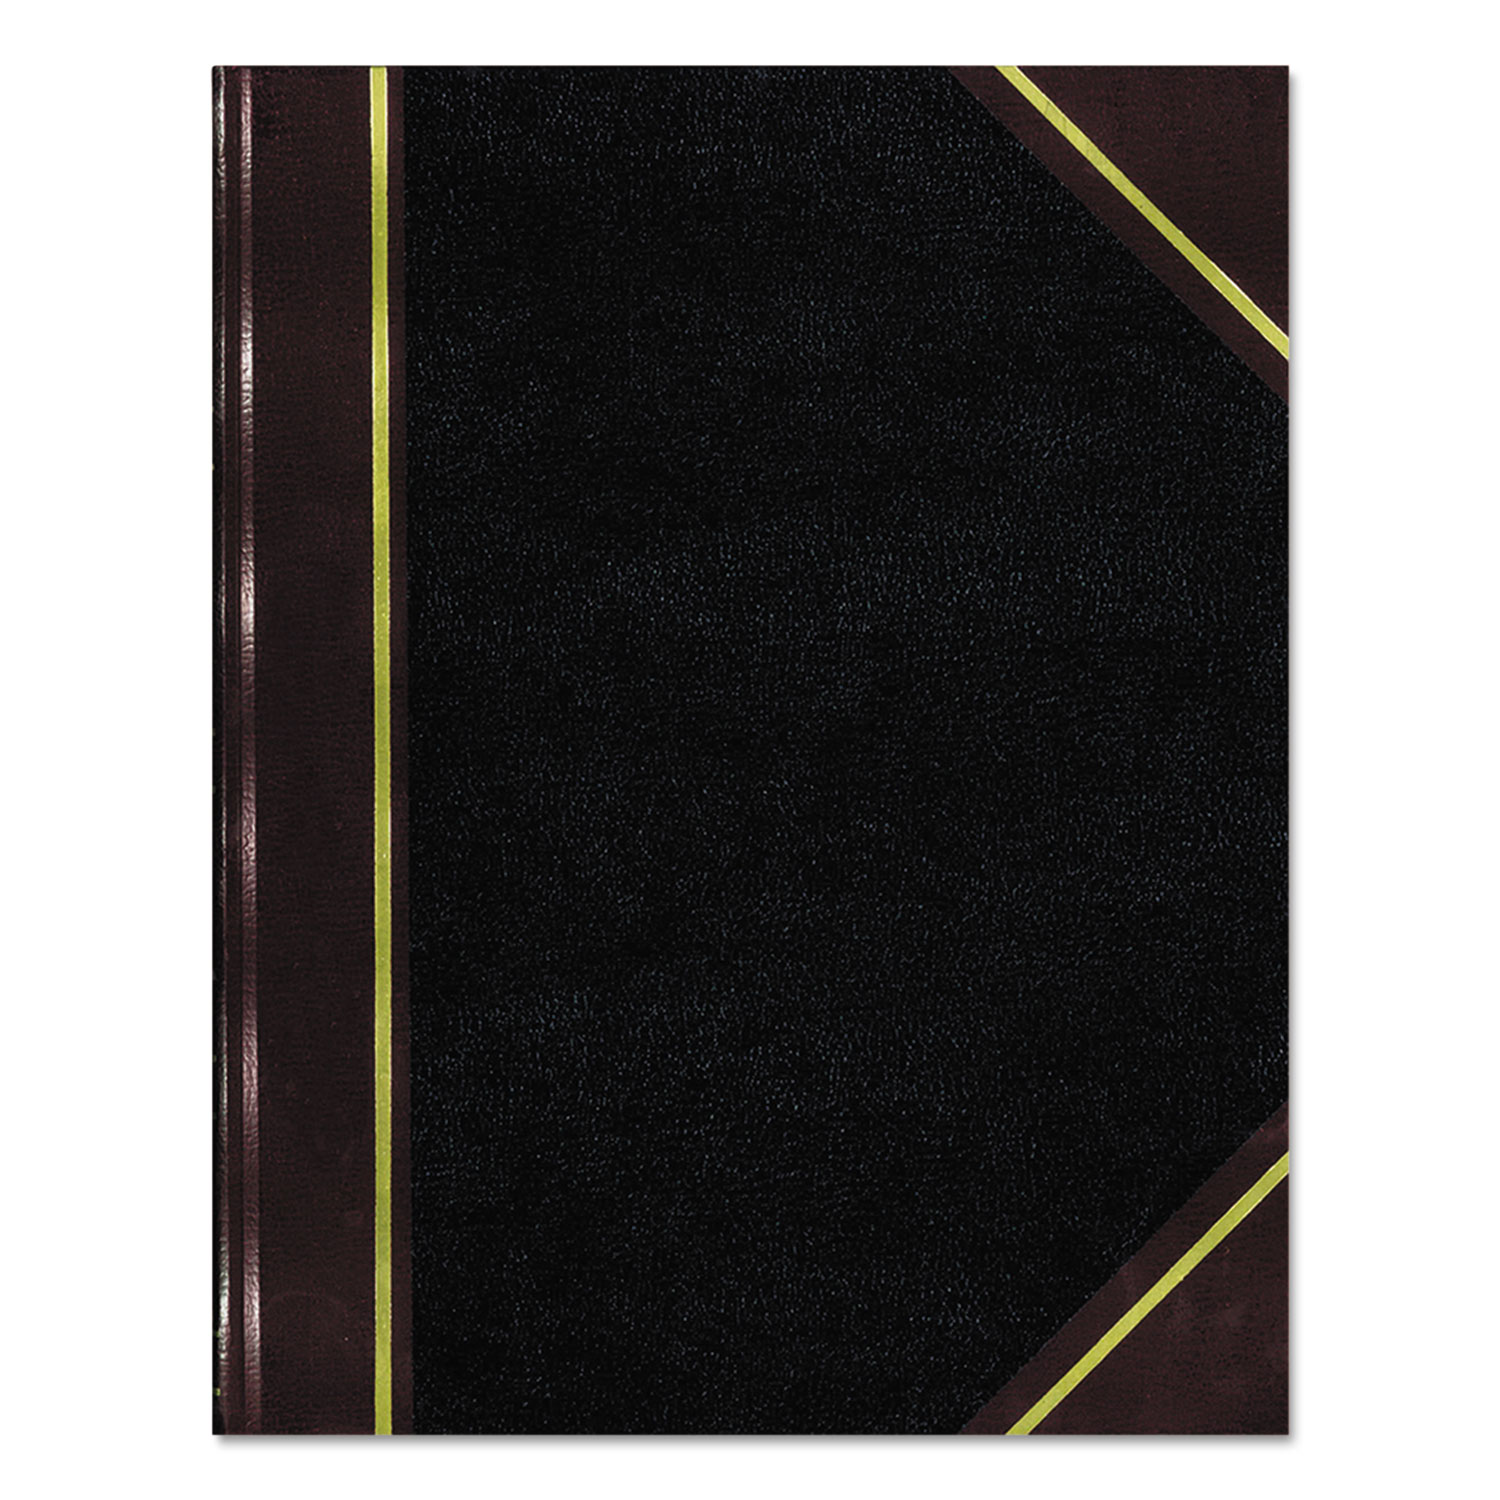  National 57131 Texthide Record Book, Black/Burgundy, 300 Green Pages, 14 1/4 x 8 3/4 (RED57131) 